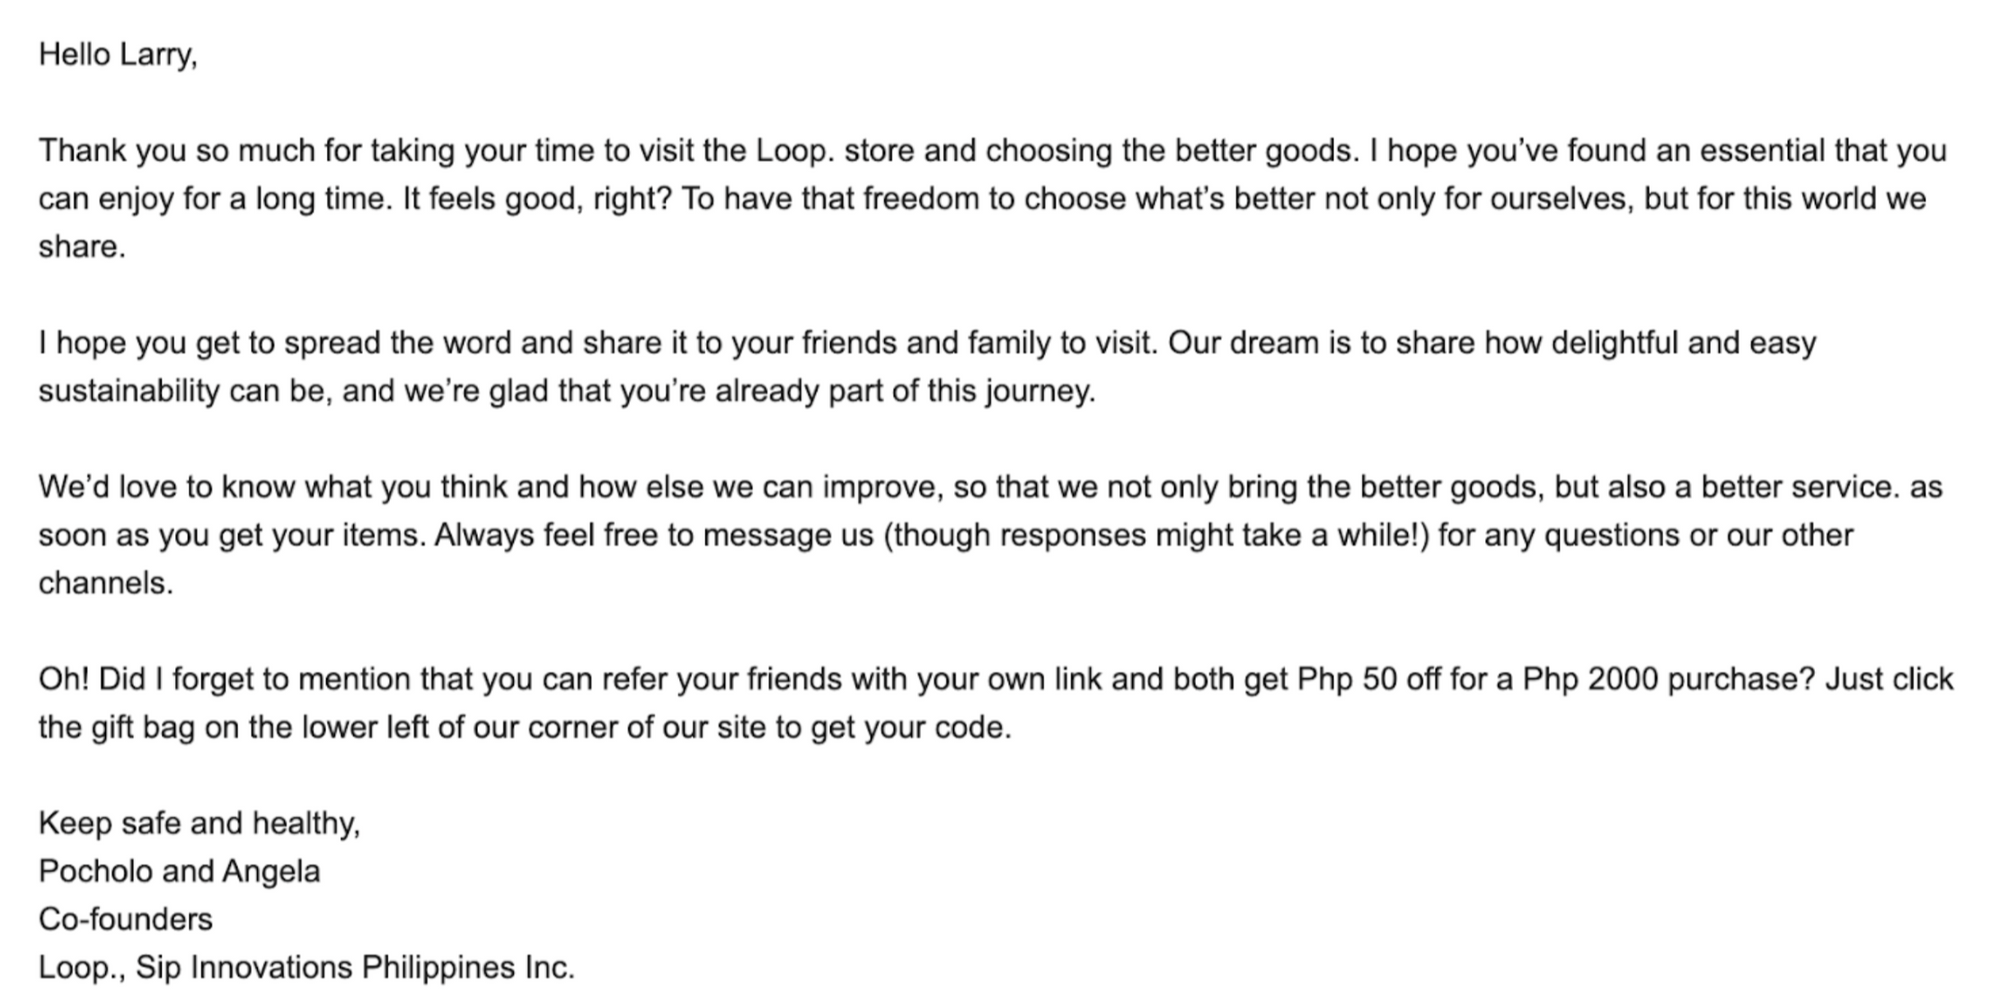 Building a brand’s community through email marketing–A screenshot from Loop with text on a thank you email from the co-founder.